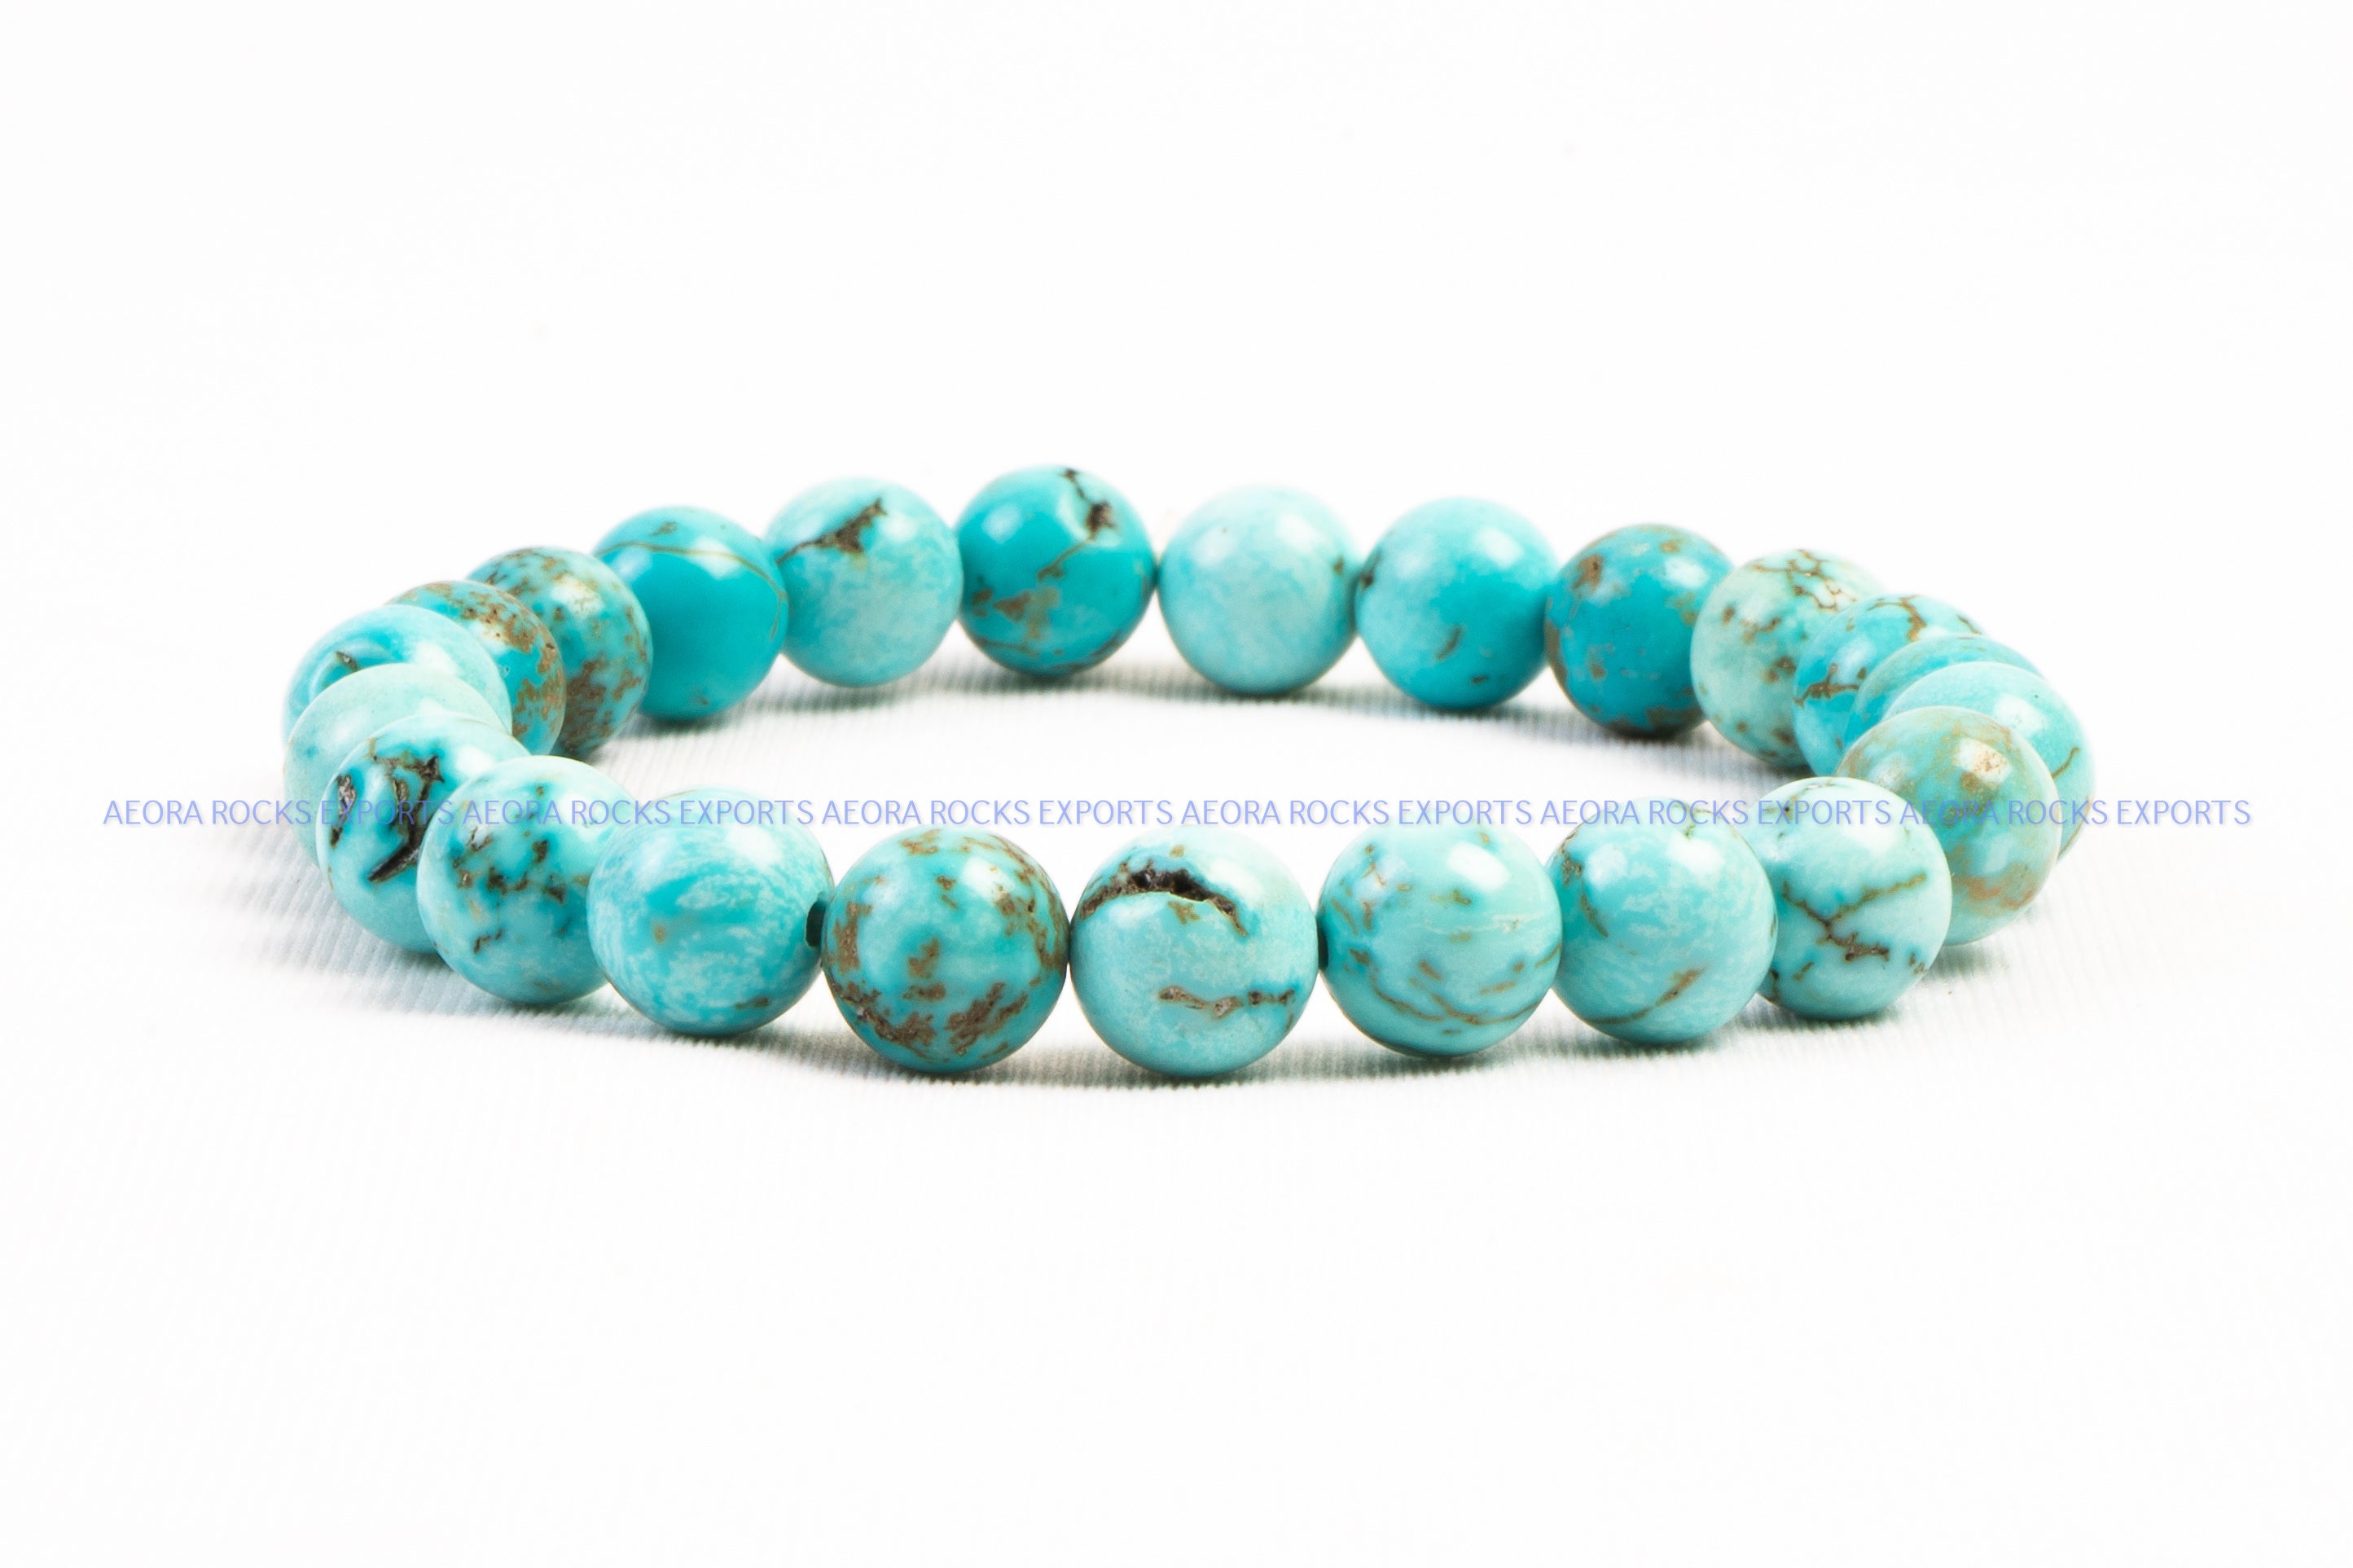 The Bombay Store Beaded Handcuff in Teal Blue